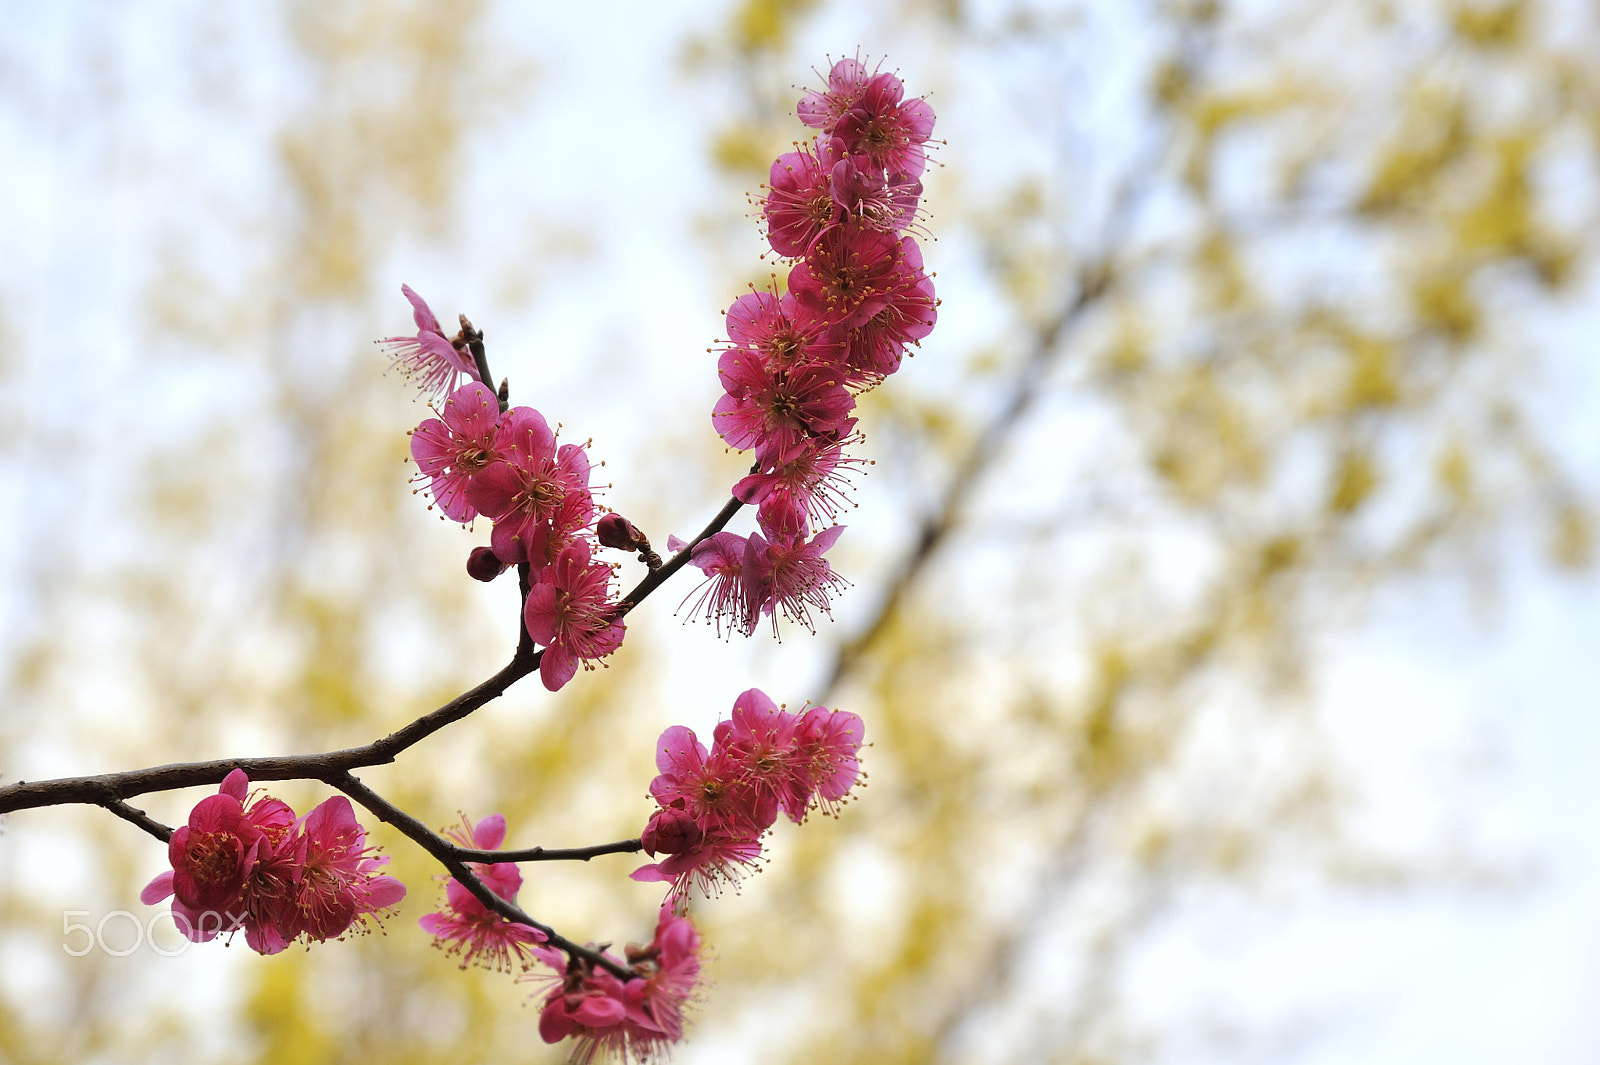 Nikon D700 sample photo. One spring day photography